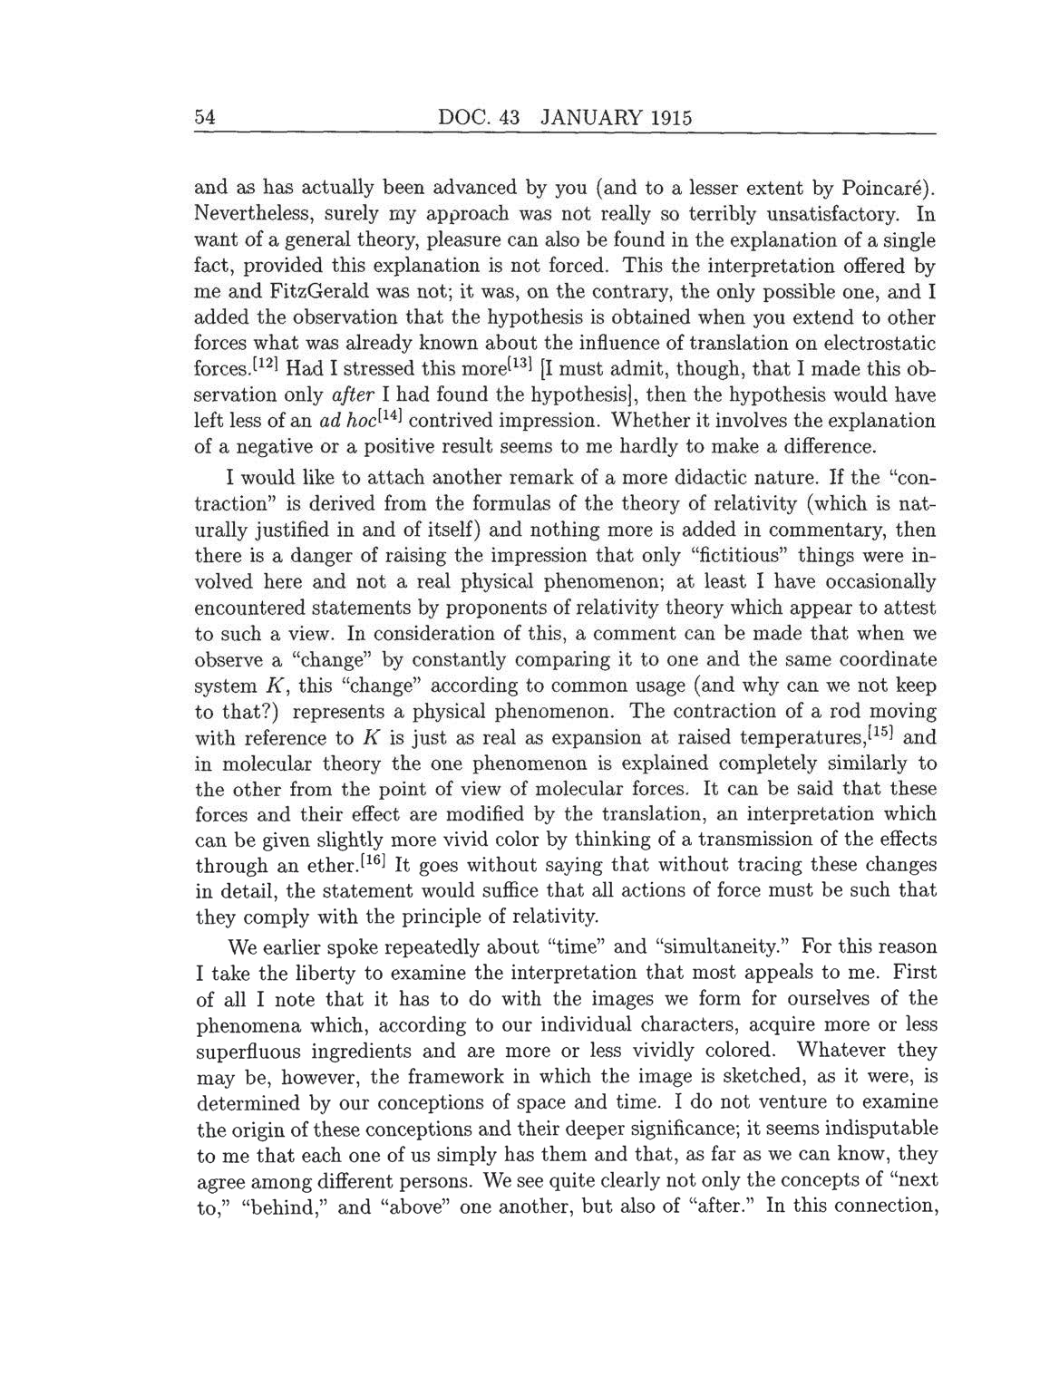 Volume 8: The Berlin Years: Correspondence, 1914-1918 (English translation supplement) page 54